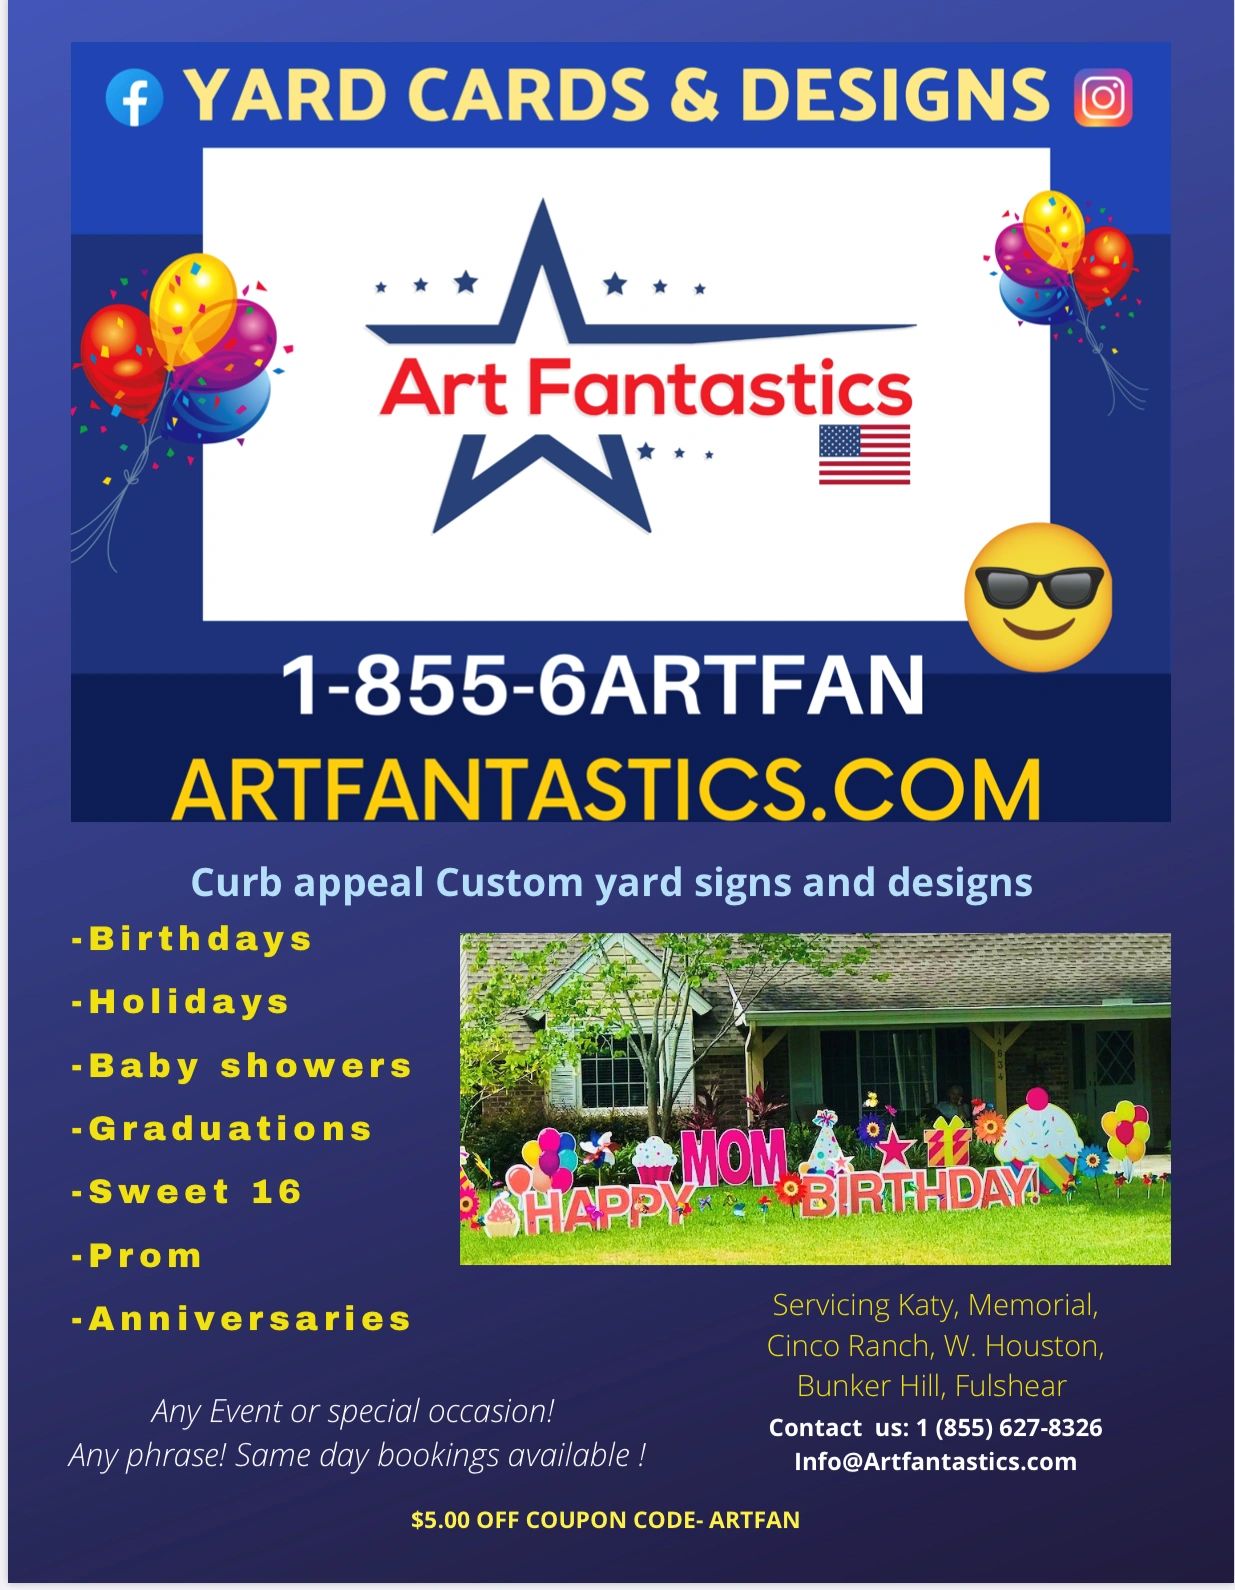 Yard cards, Party equipment, Party rentals, Cards, Lawn cards, Yard signs, Birthday signs, 